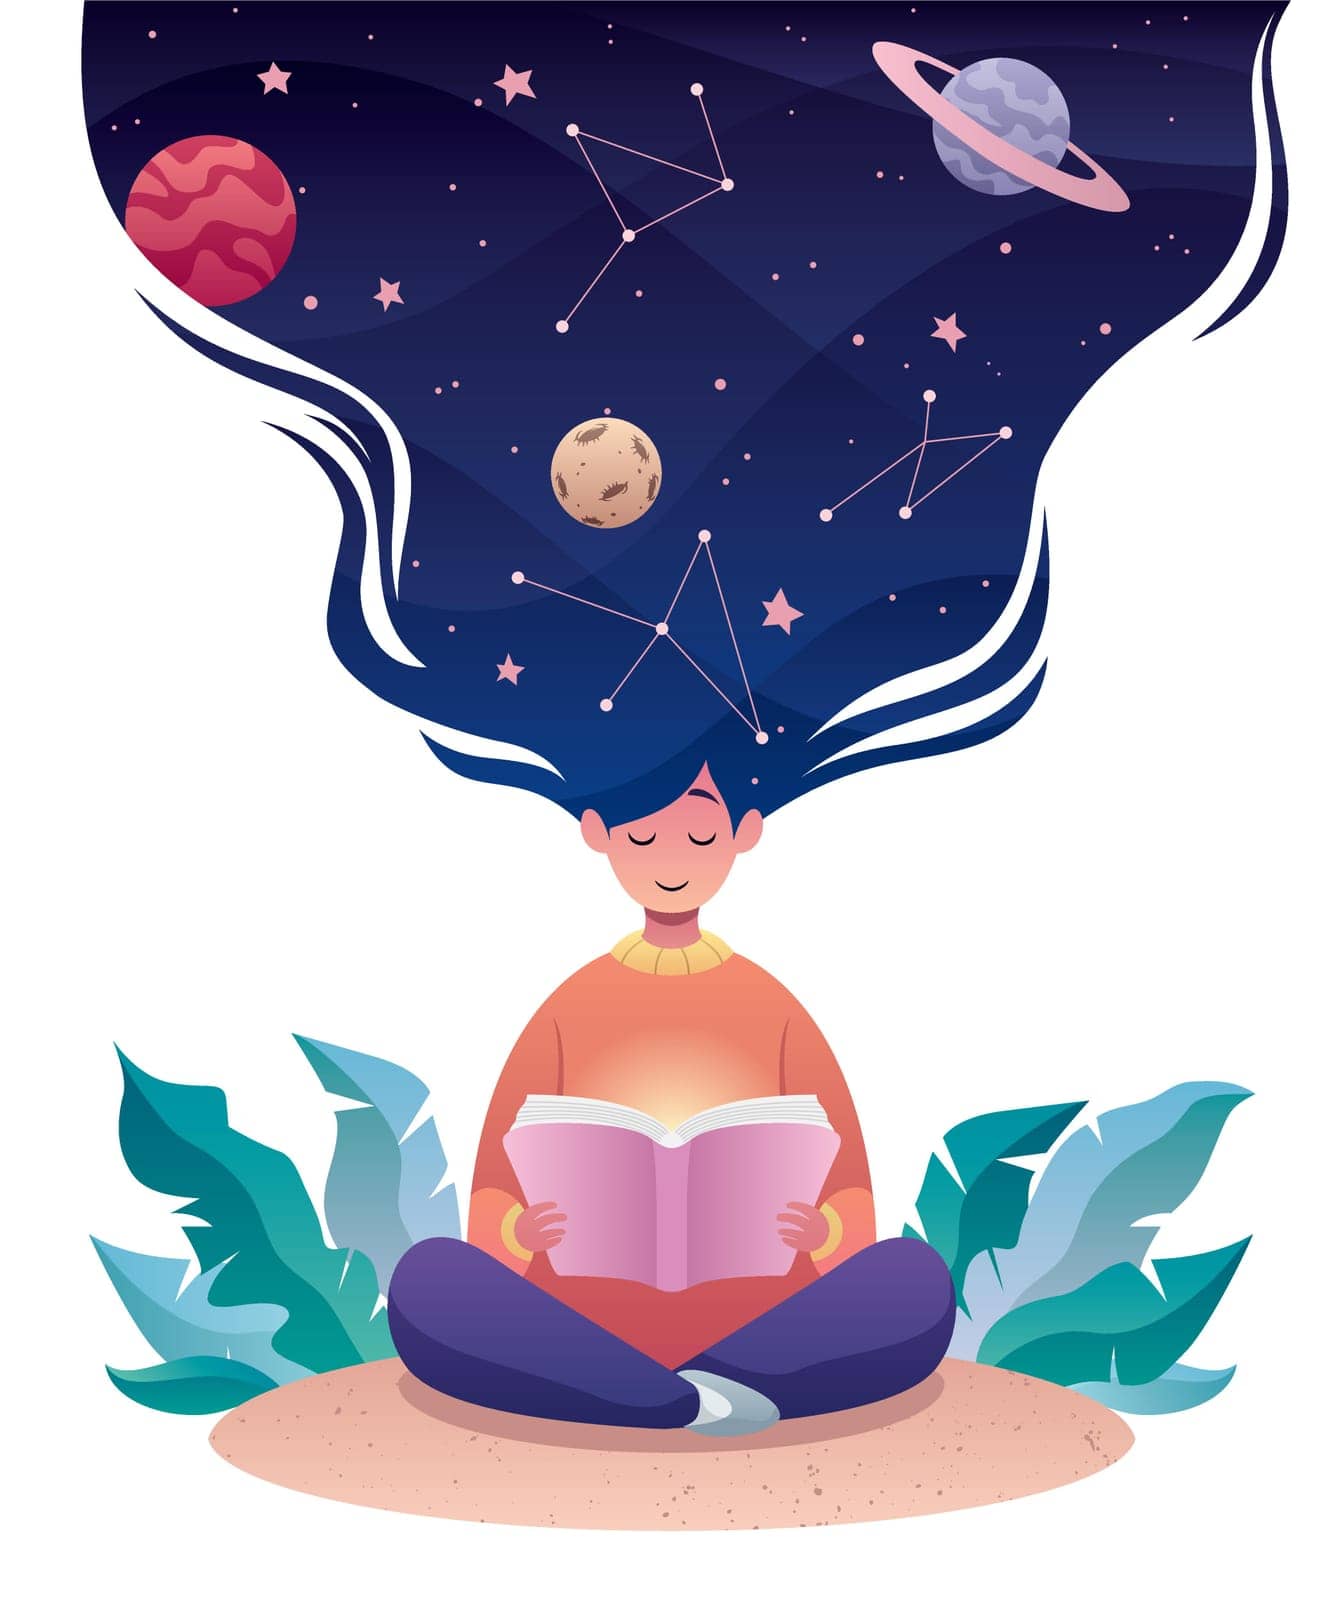 Flat design illustration of a young woman reading a book about astrology or astronomy.